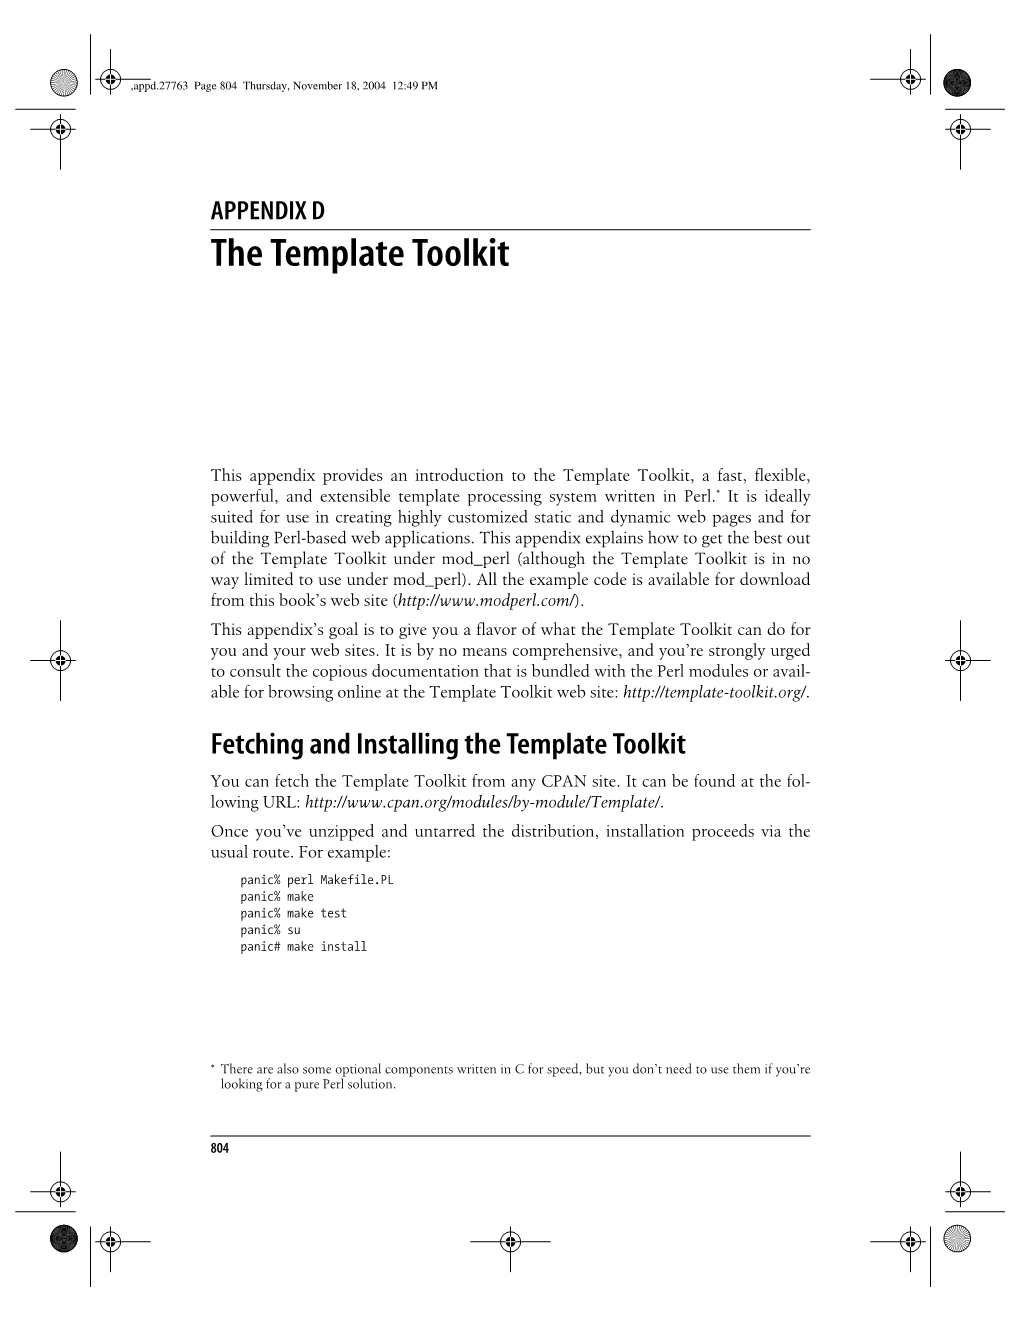 The Template Toolkit